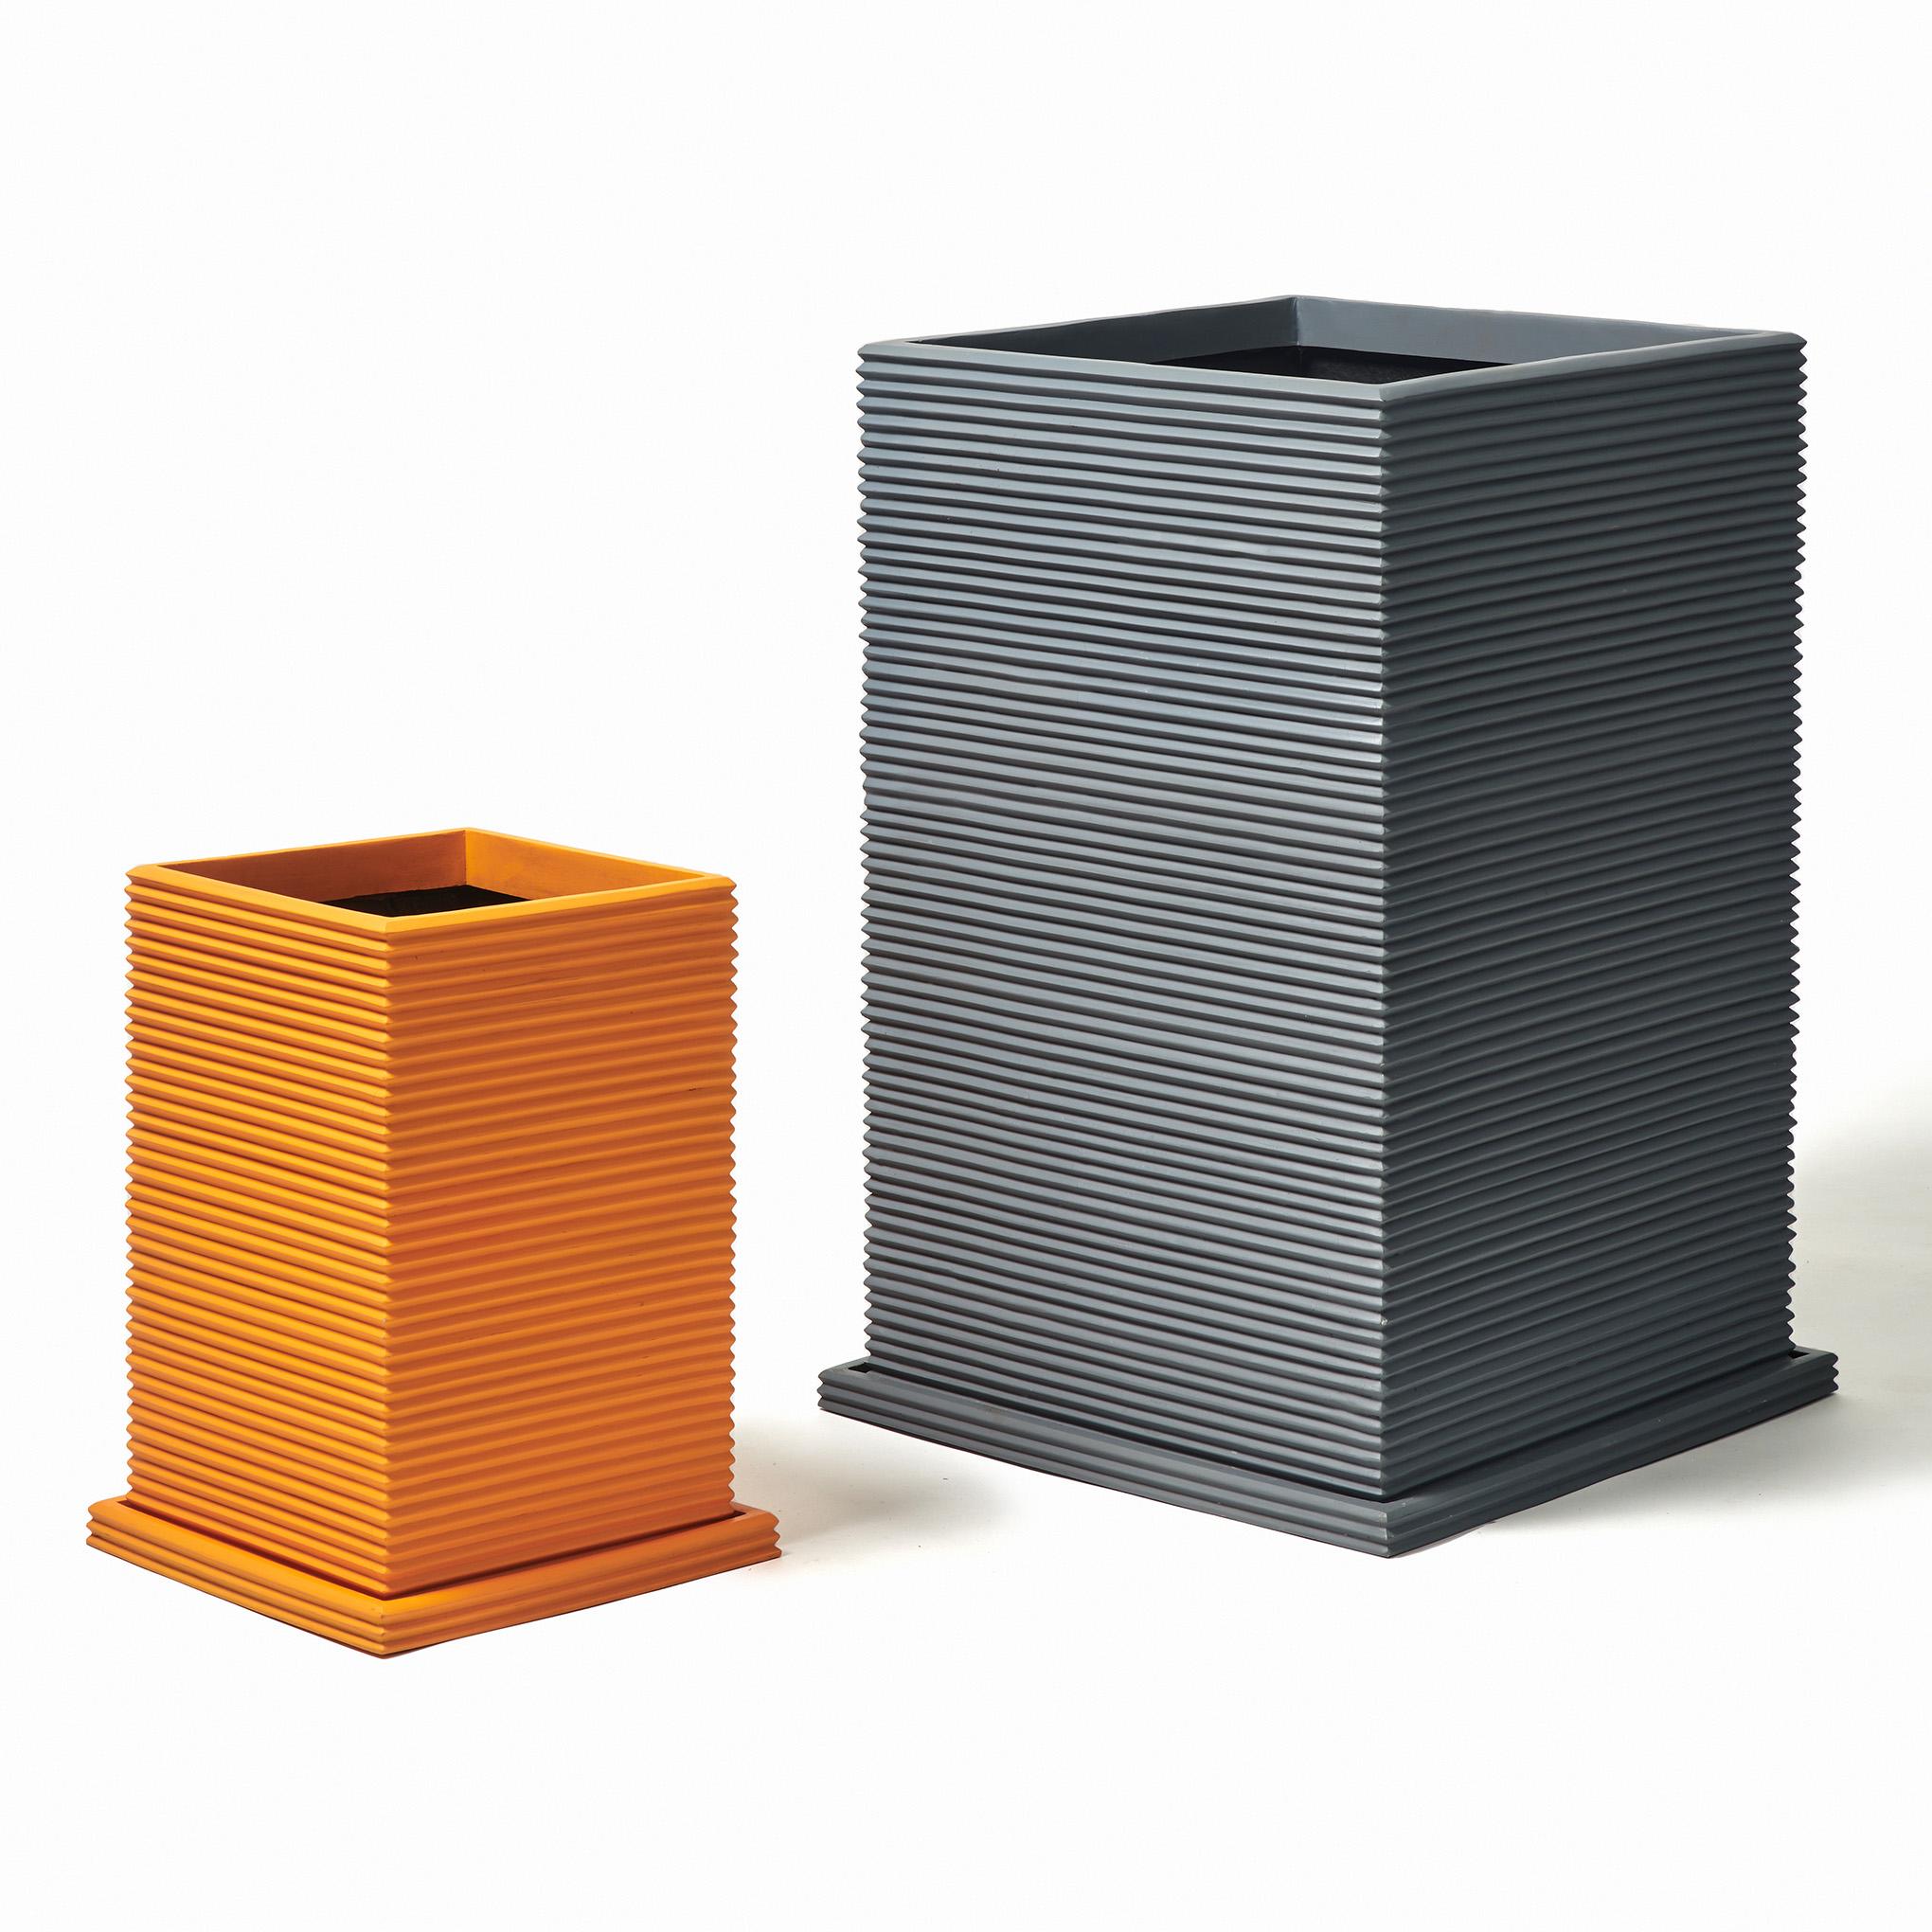 Modern Oversize Tall Rectangular Planter 'Orange' by TFM, Rep by Tuleste Factory